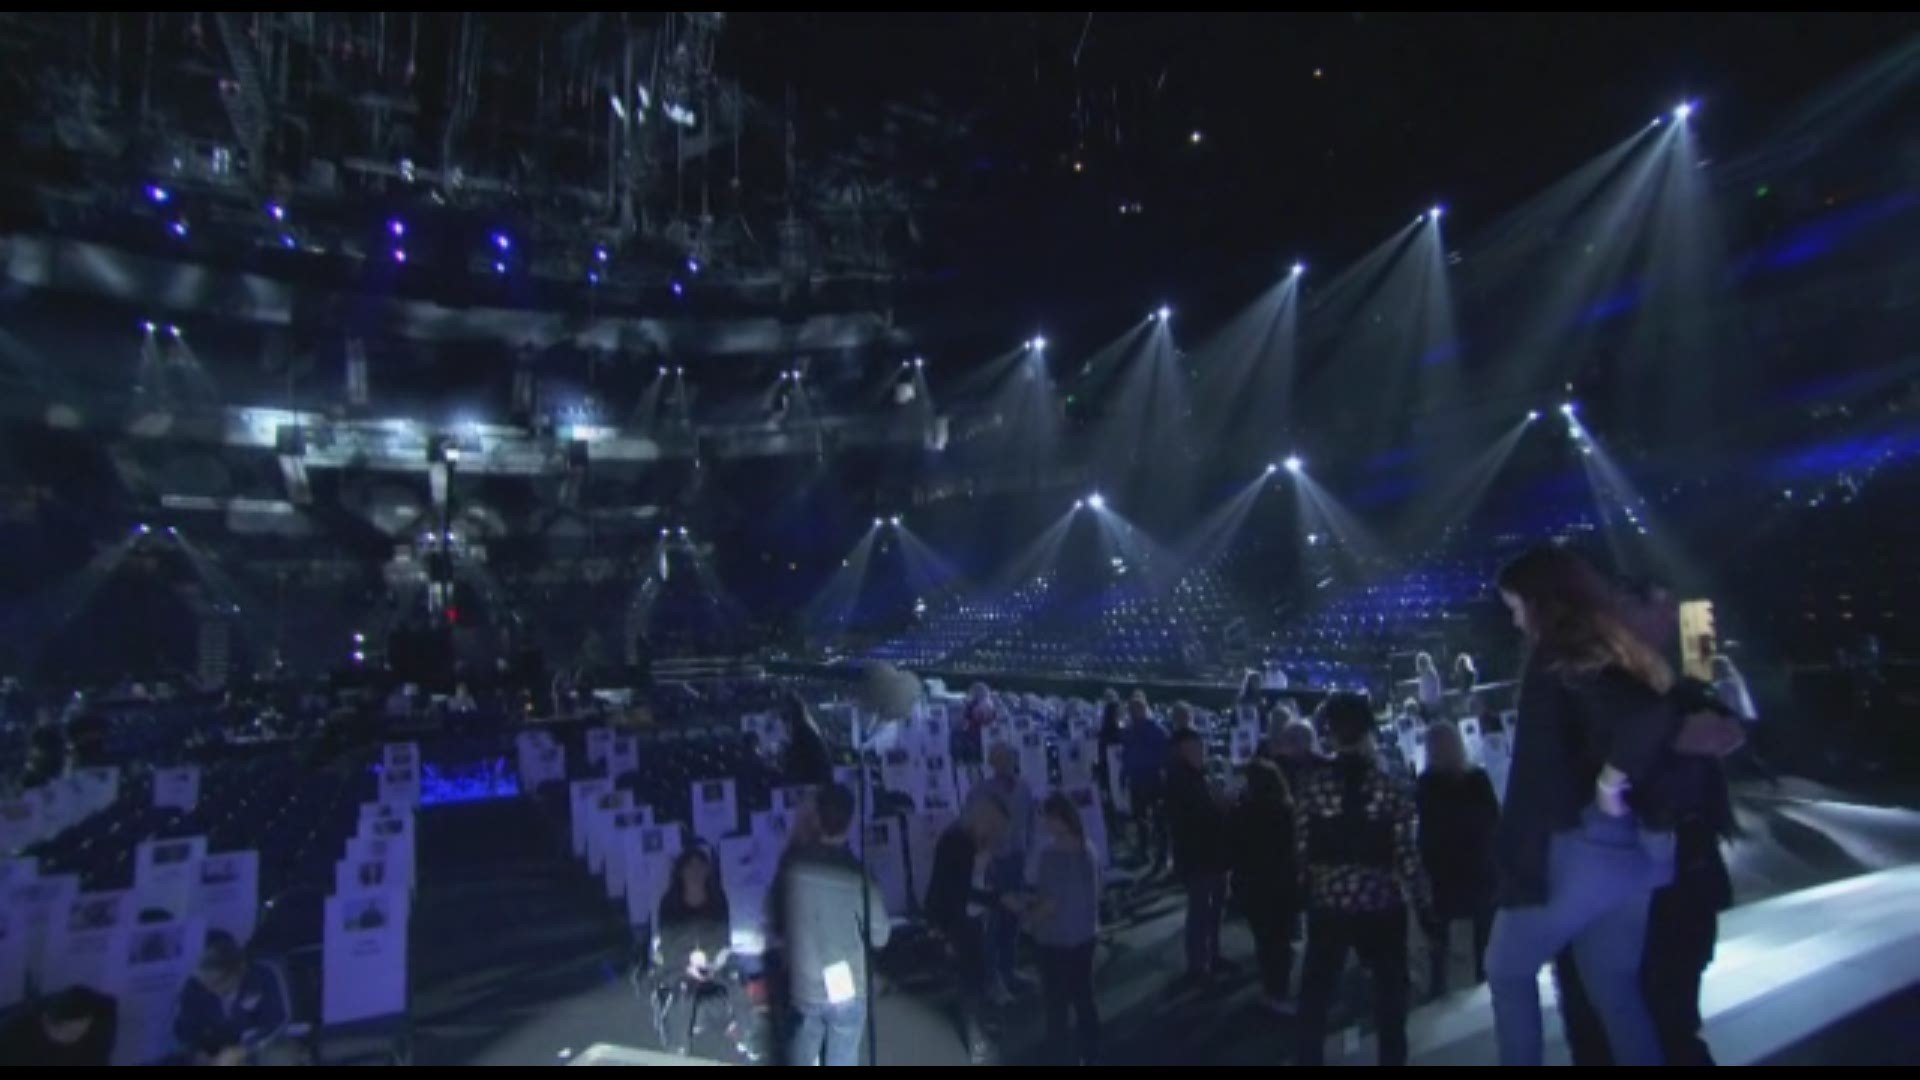 The 50th Anniversary of the CMA Awards take place on WHAS11